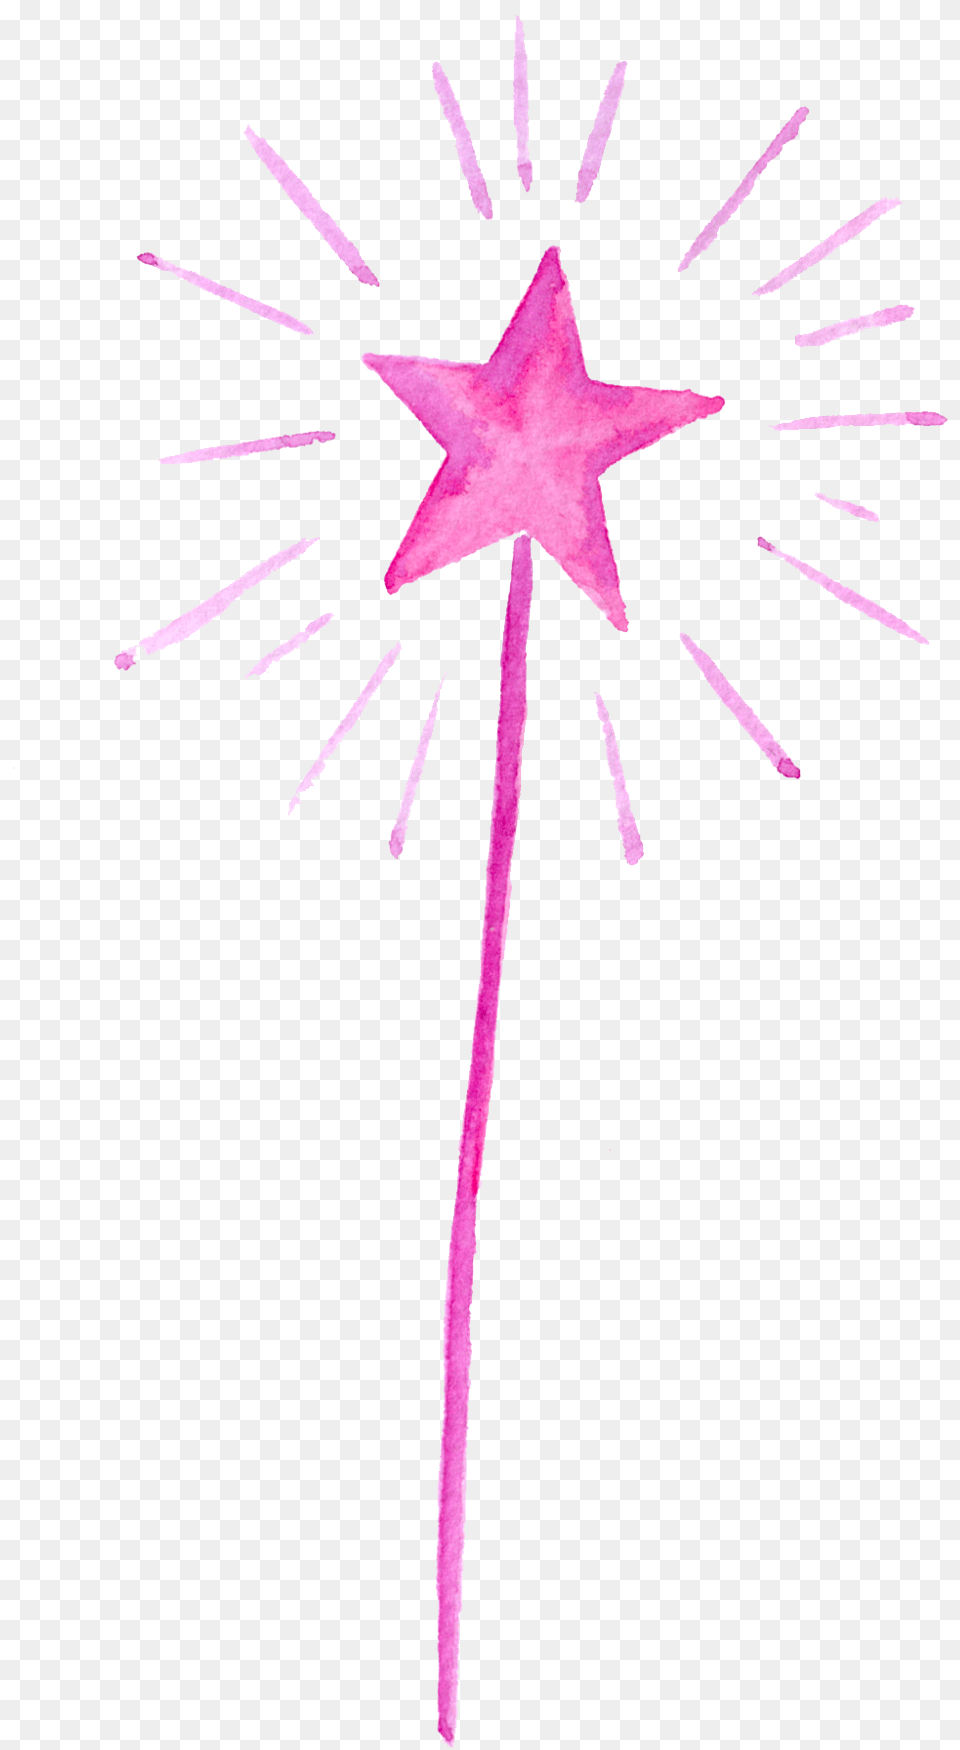 Report Abuse Watercolor Painting, Star Symbol, Symbol, Plant, Wand Png